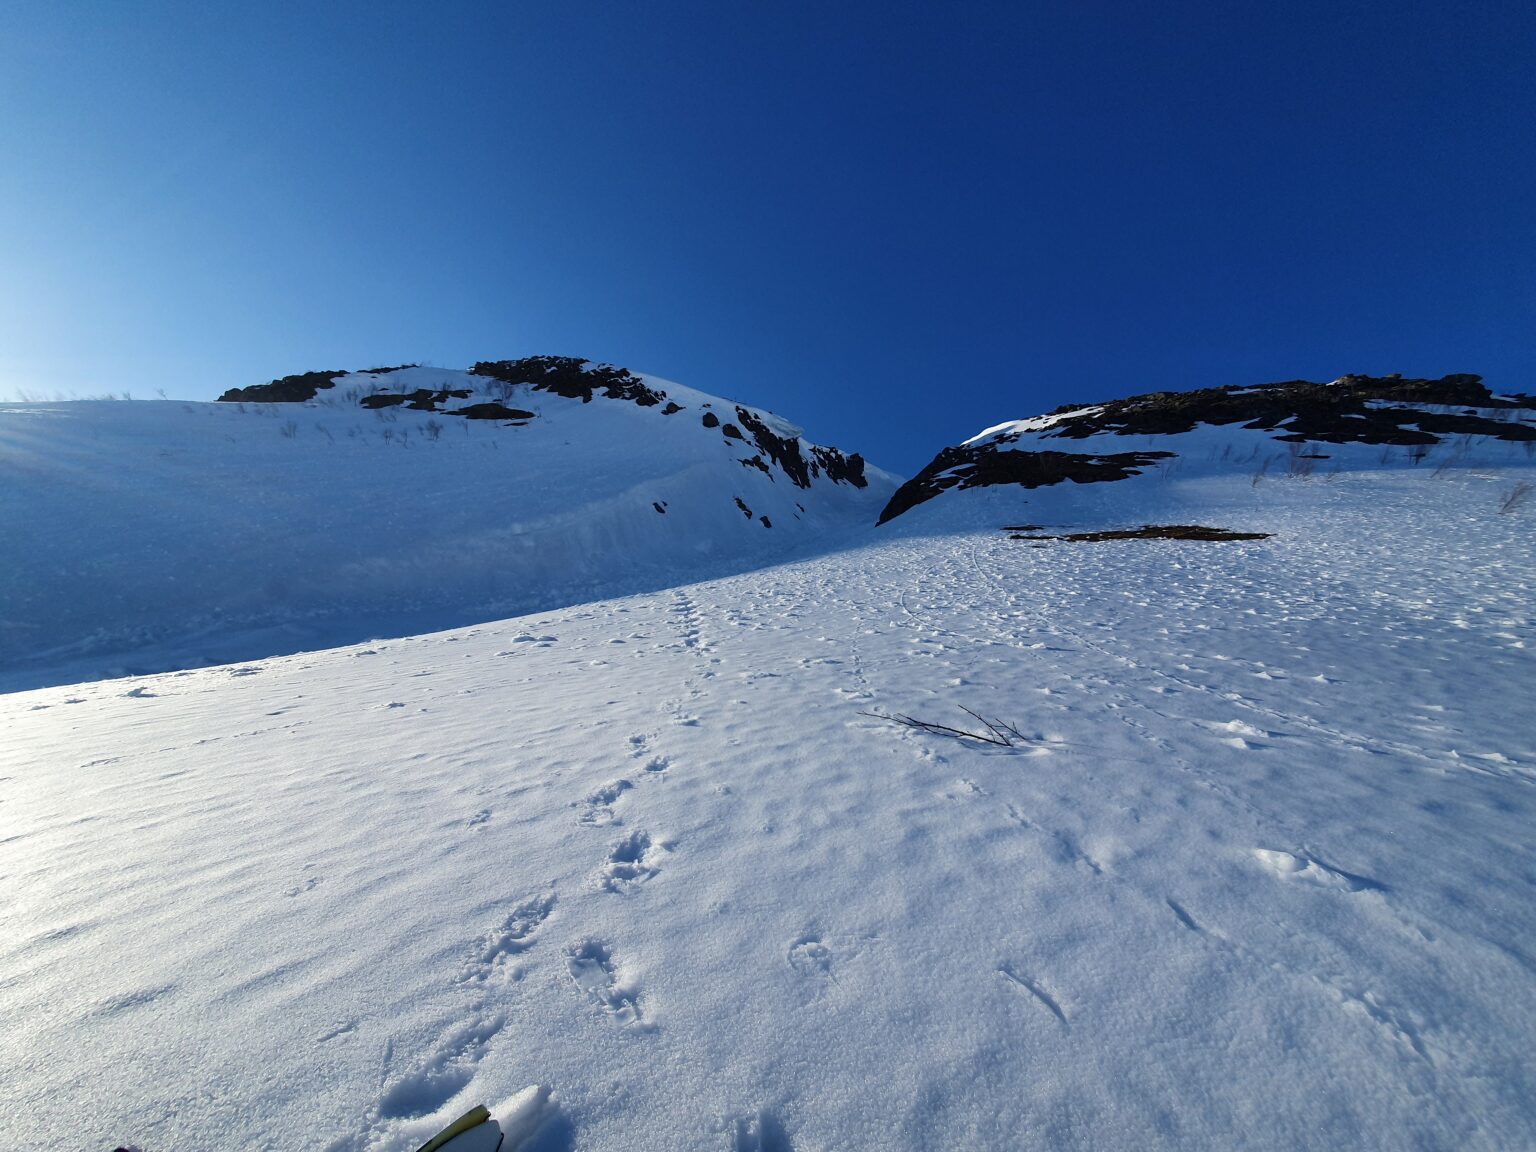 Looking up the south gully on Tamokfjellet